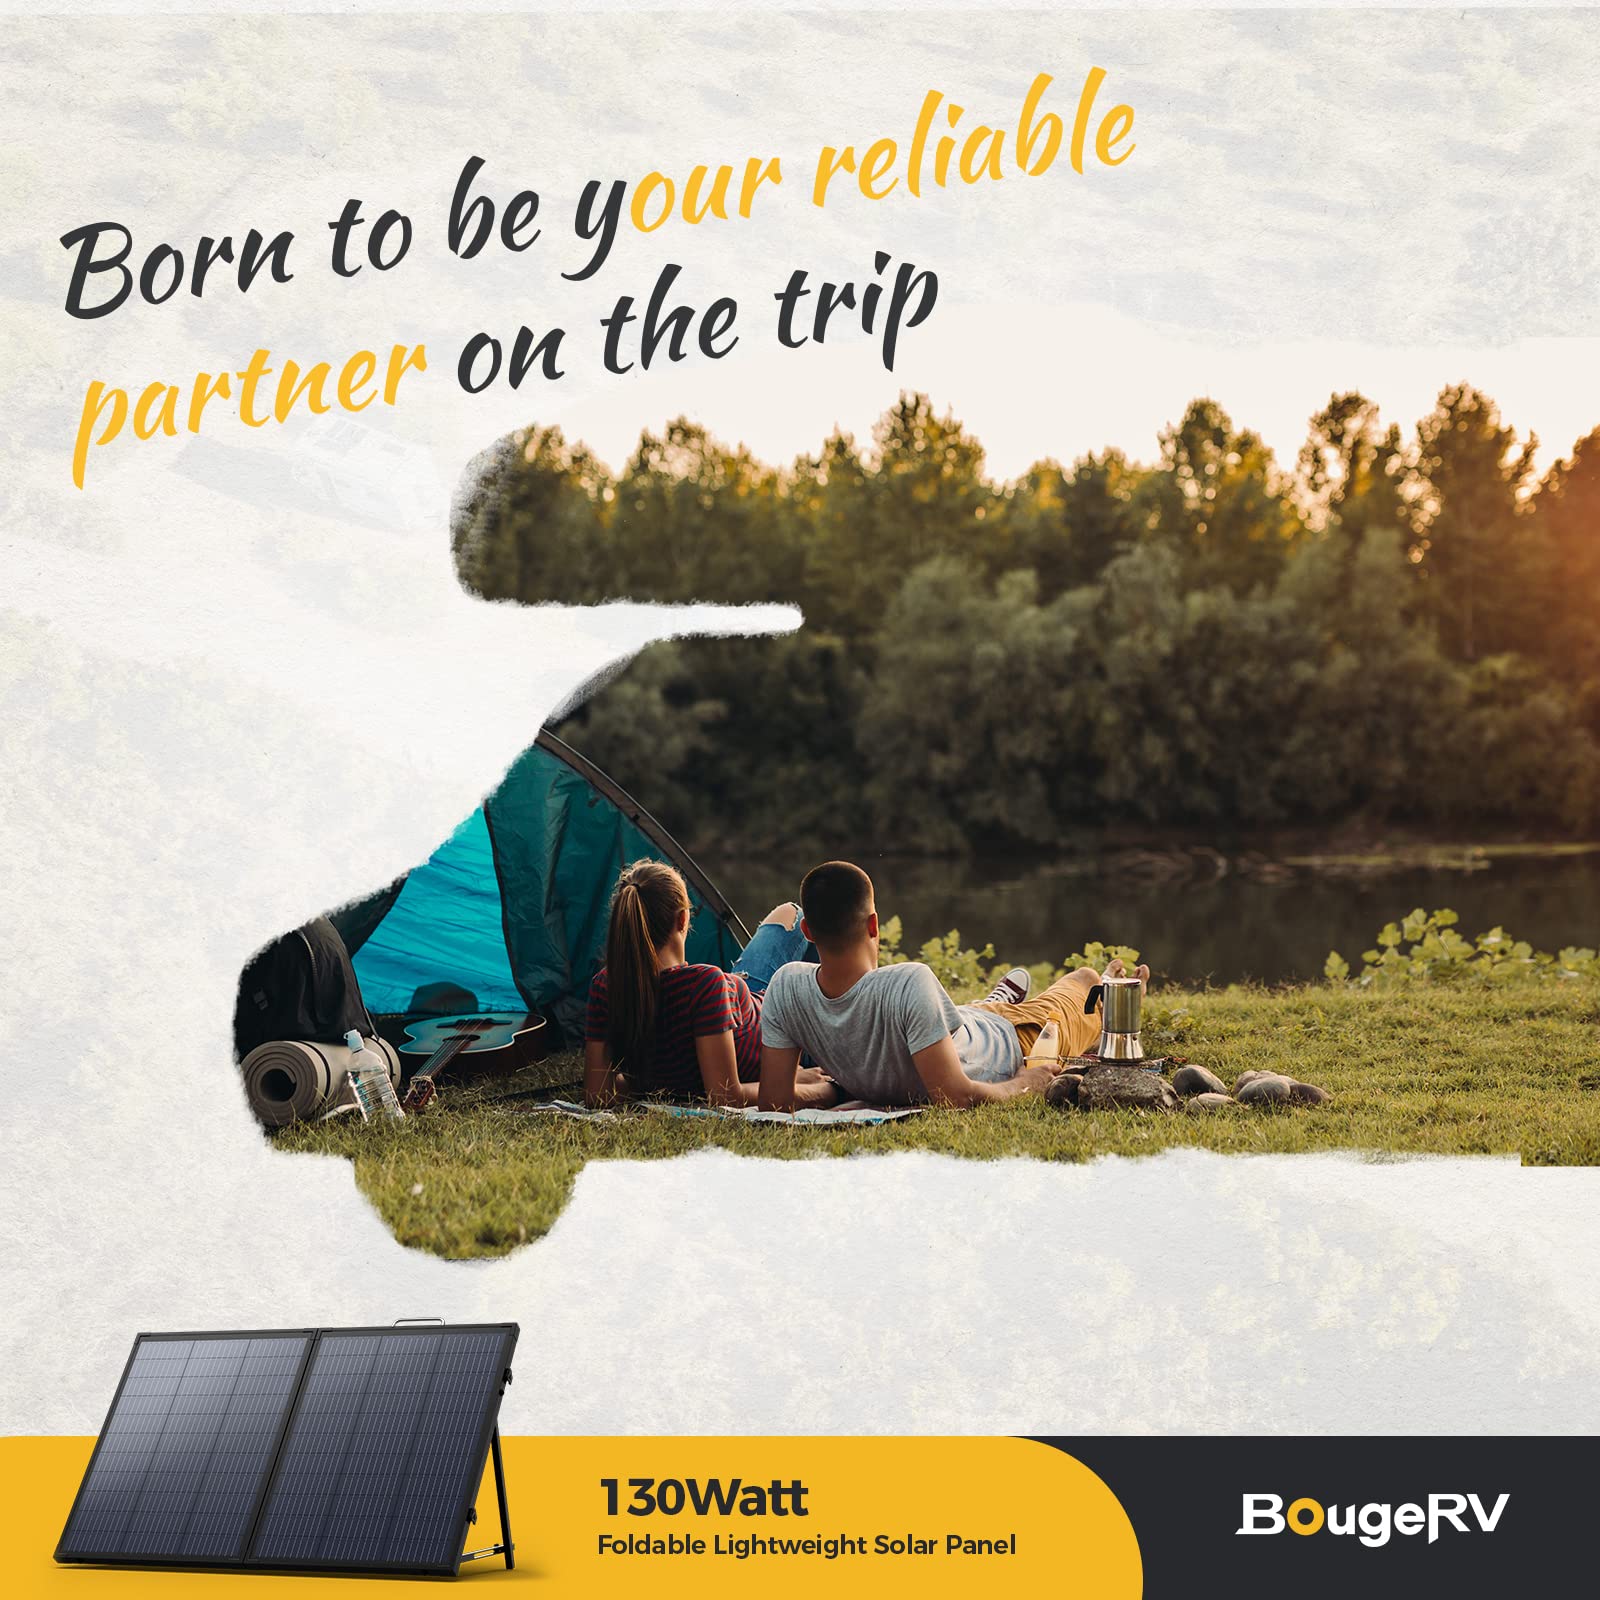 BougeRV 130W Portable Solar Panel, with Suitcase, Self-Supportable Kickstand, Foldable Lightweight Solar Charger for Outdoor Generator Power Station, RV, Camping Off-Grid